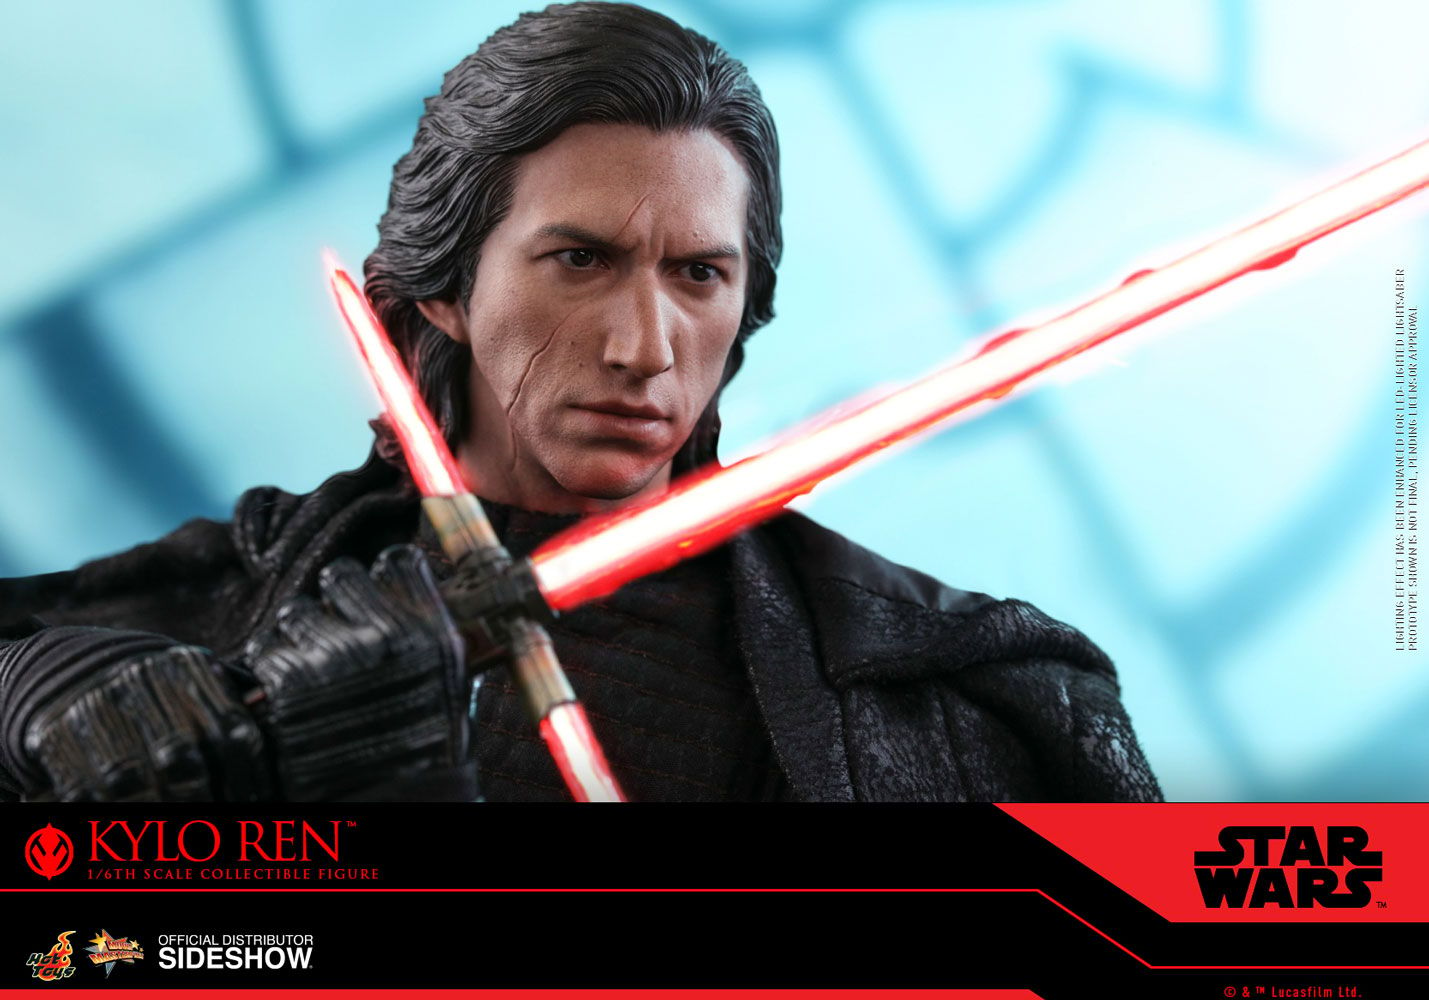 HOT TOYS STAR WARS RISE OF SKYWALKER KYLO REN SIXTH SCALE FIGURE NEW IN BOX 